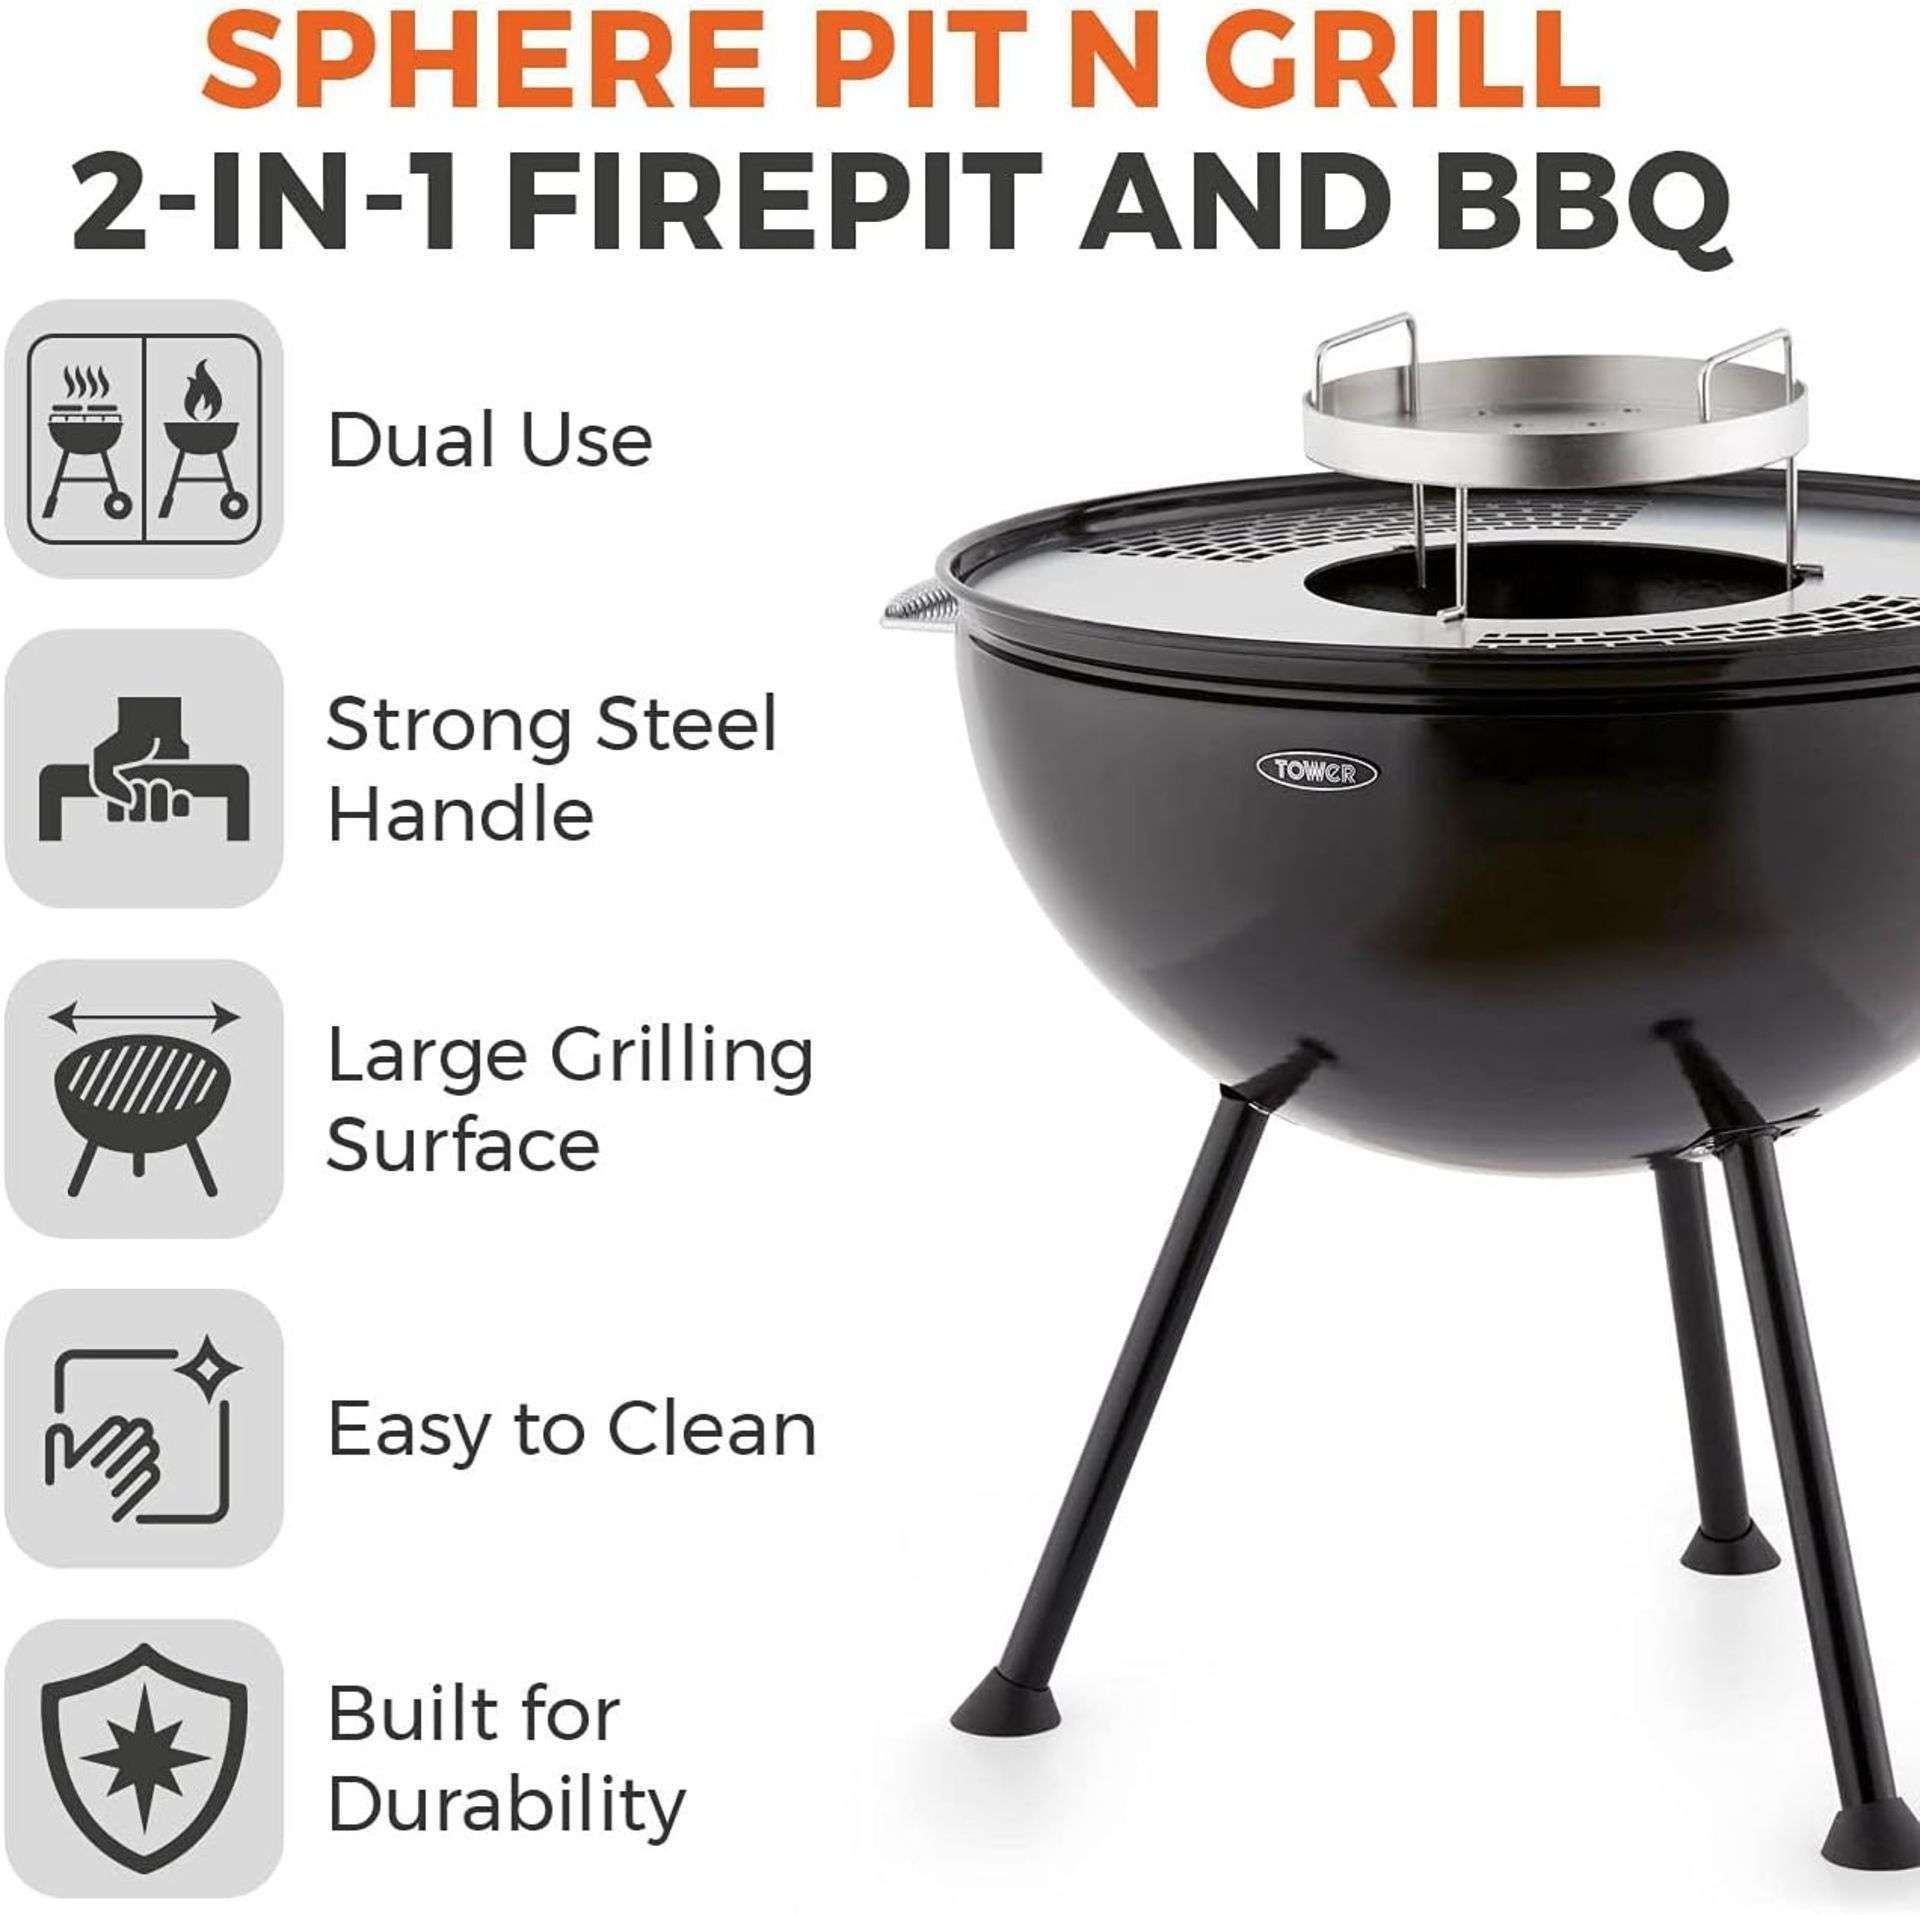 New & Boxed Tower Sphere Fire Pit and BBQ Grill, Black. (VQ577). DUAL USE â€“ This multi- - Image 2 of 4